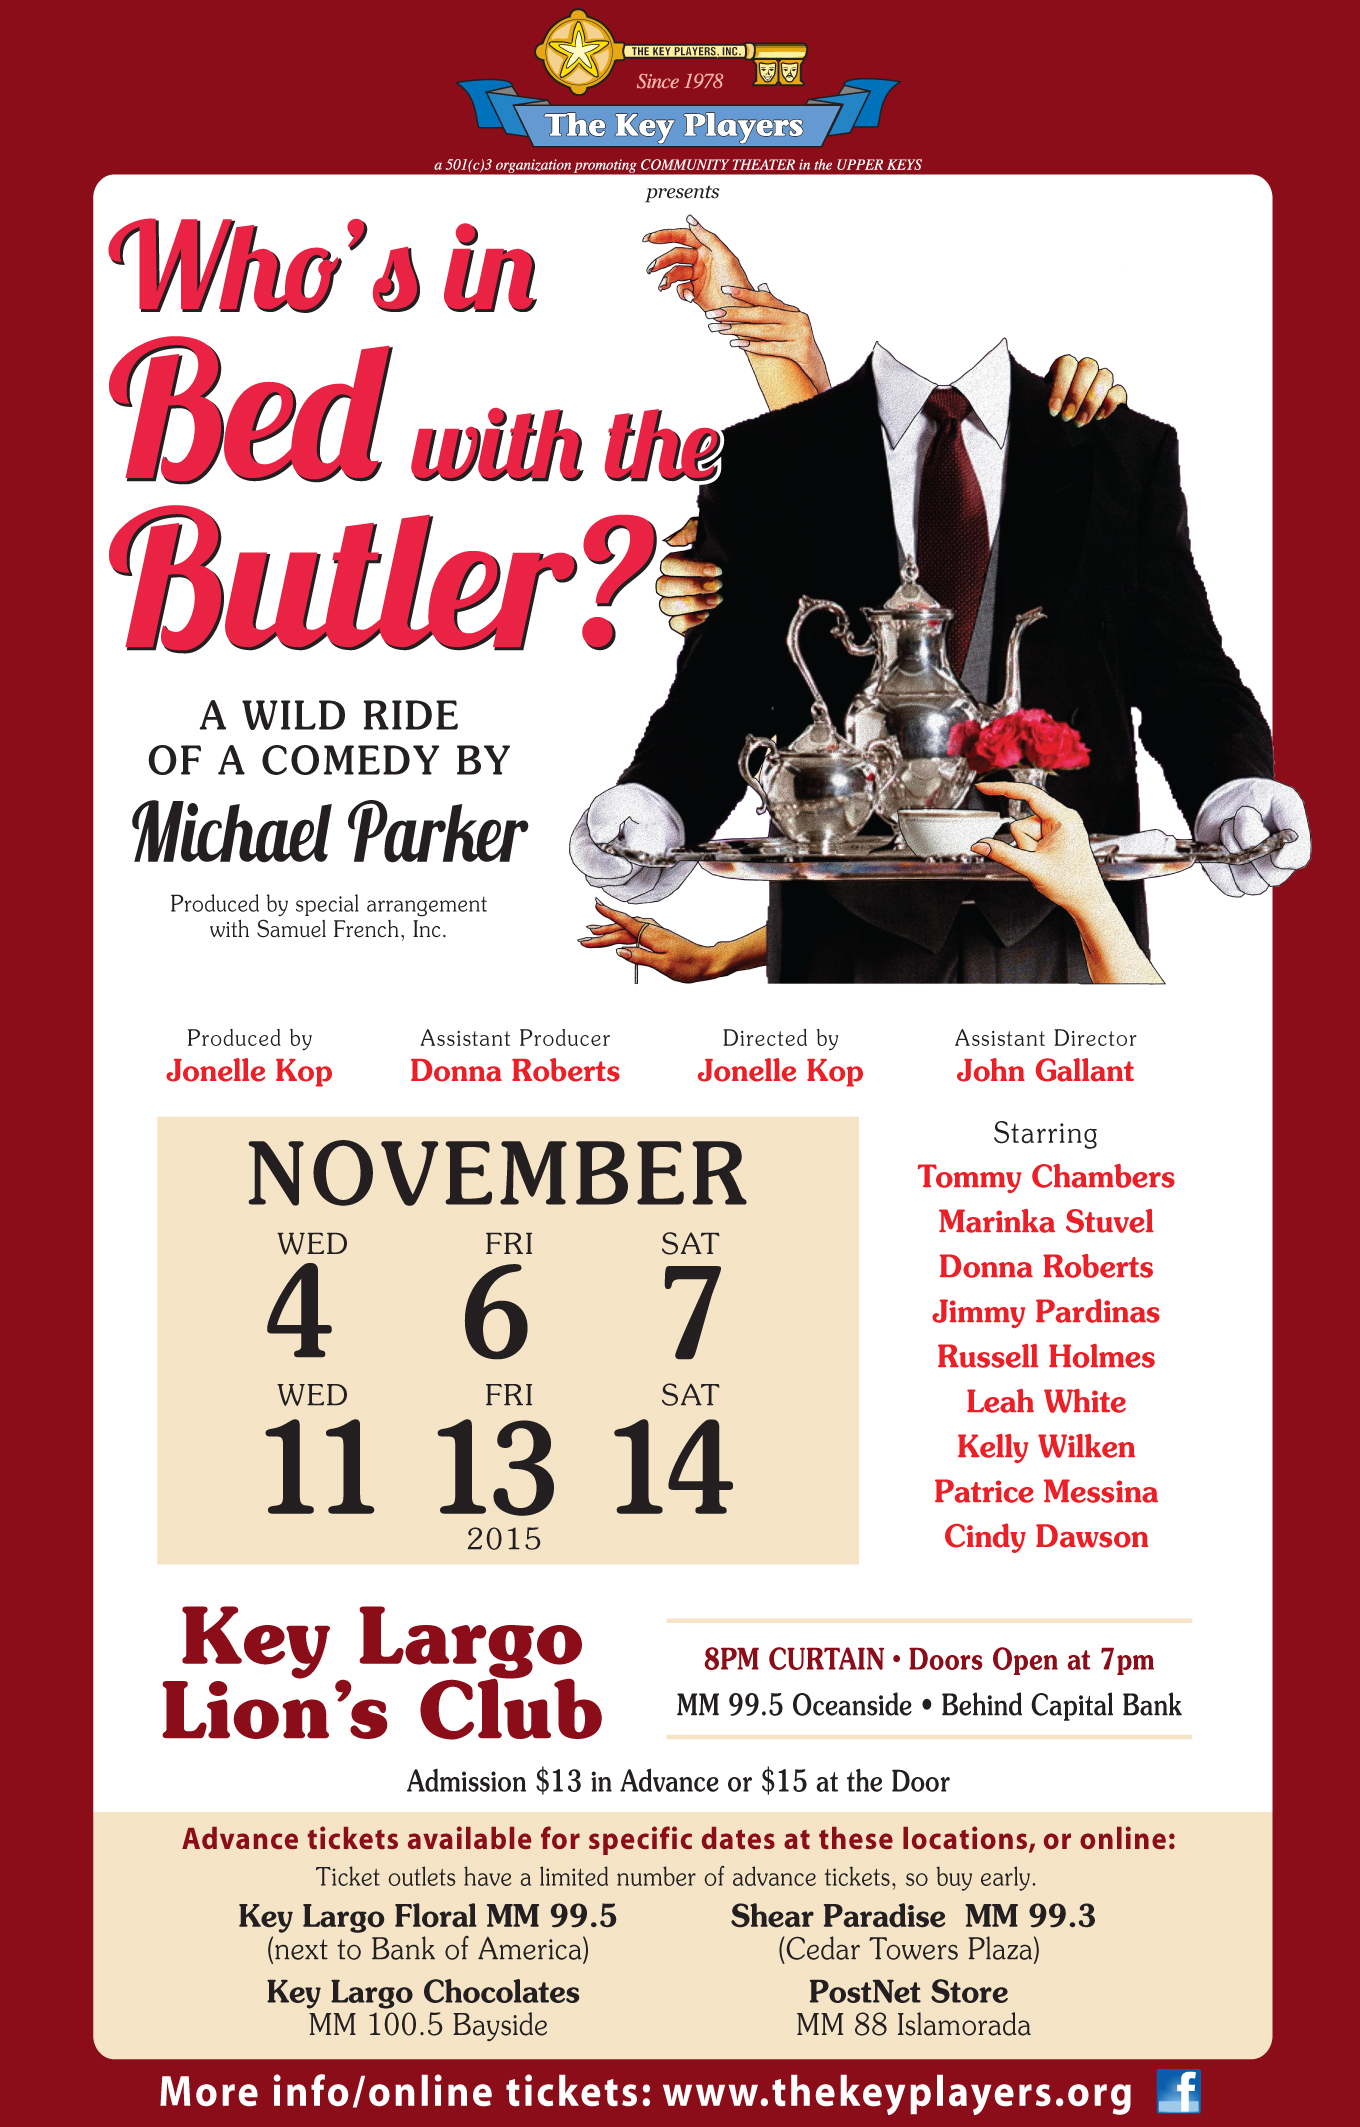 Who's in Bed with the Butler show poster